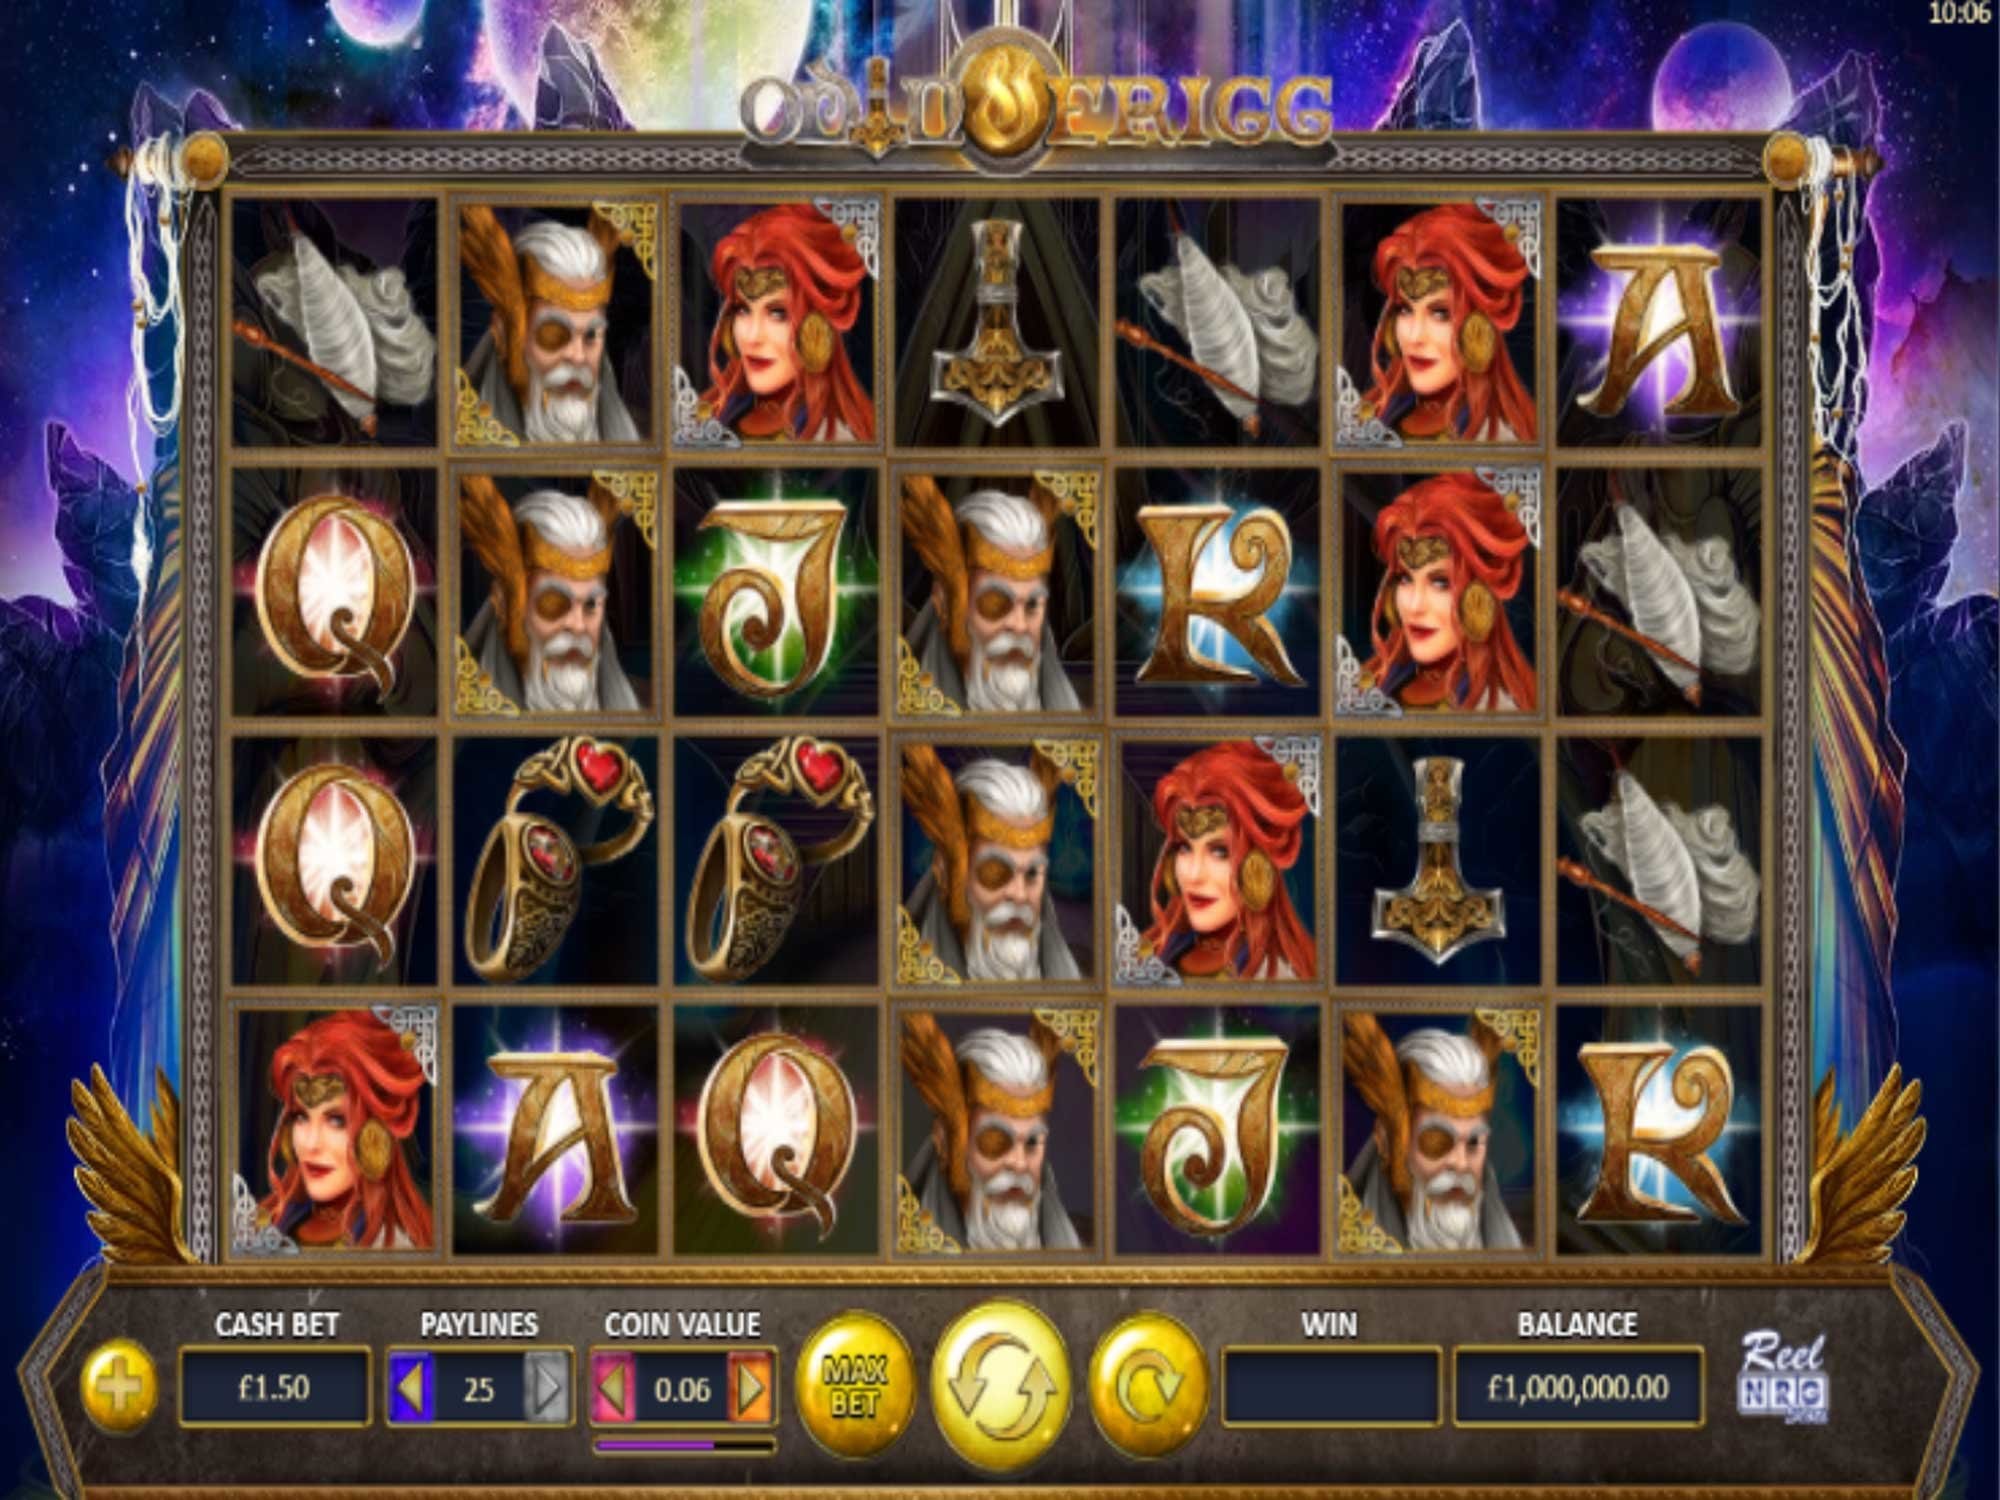 Igt Slots Game Of The Gods